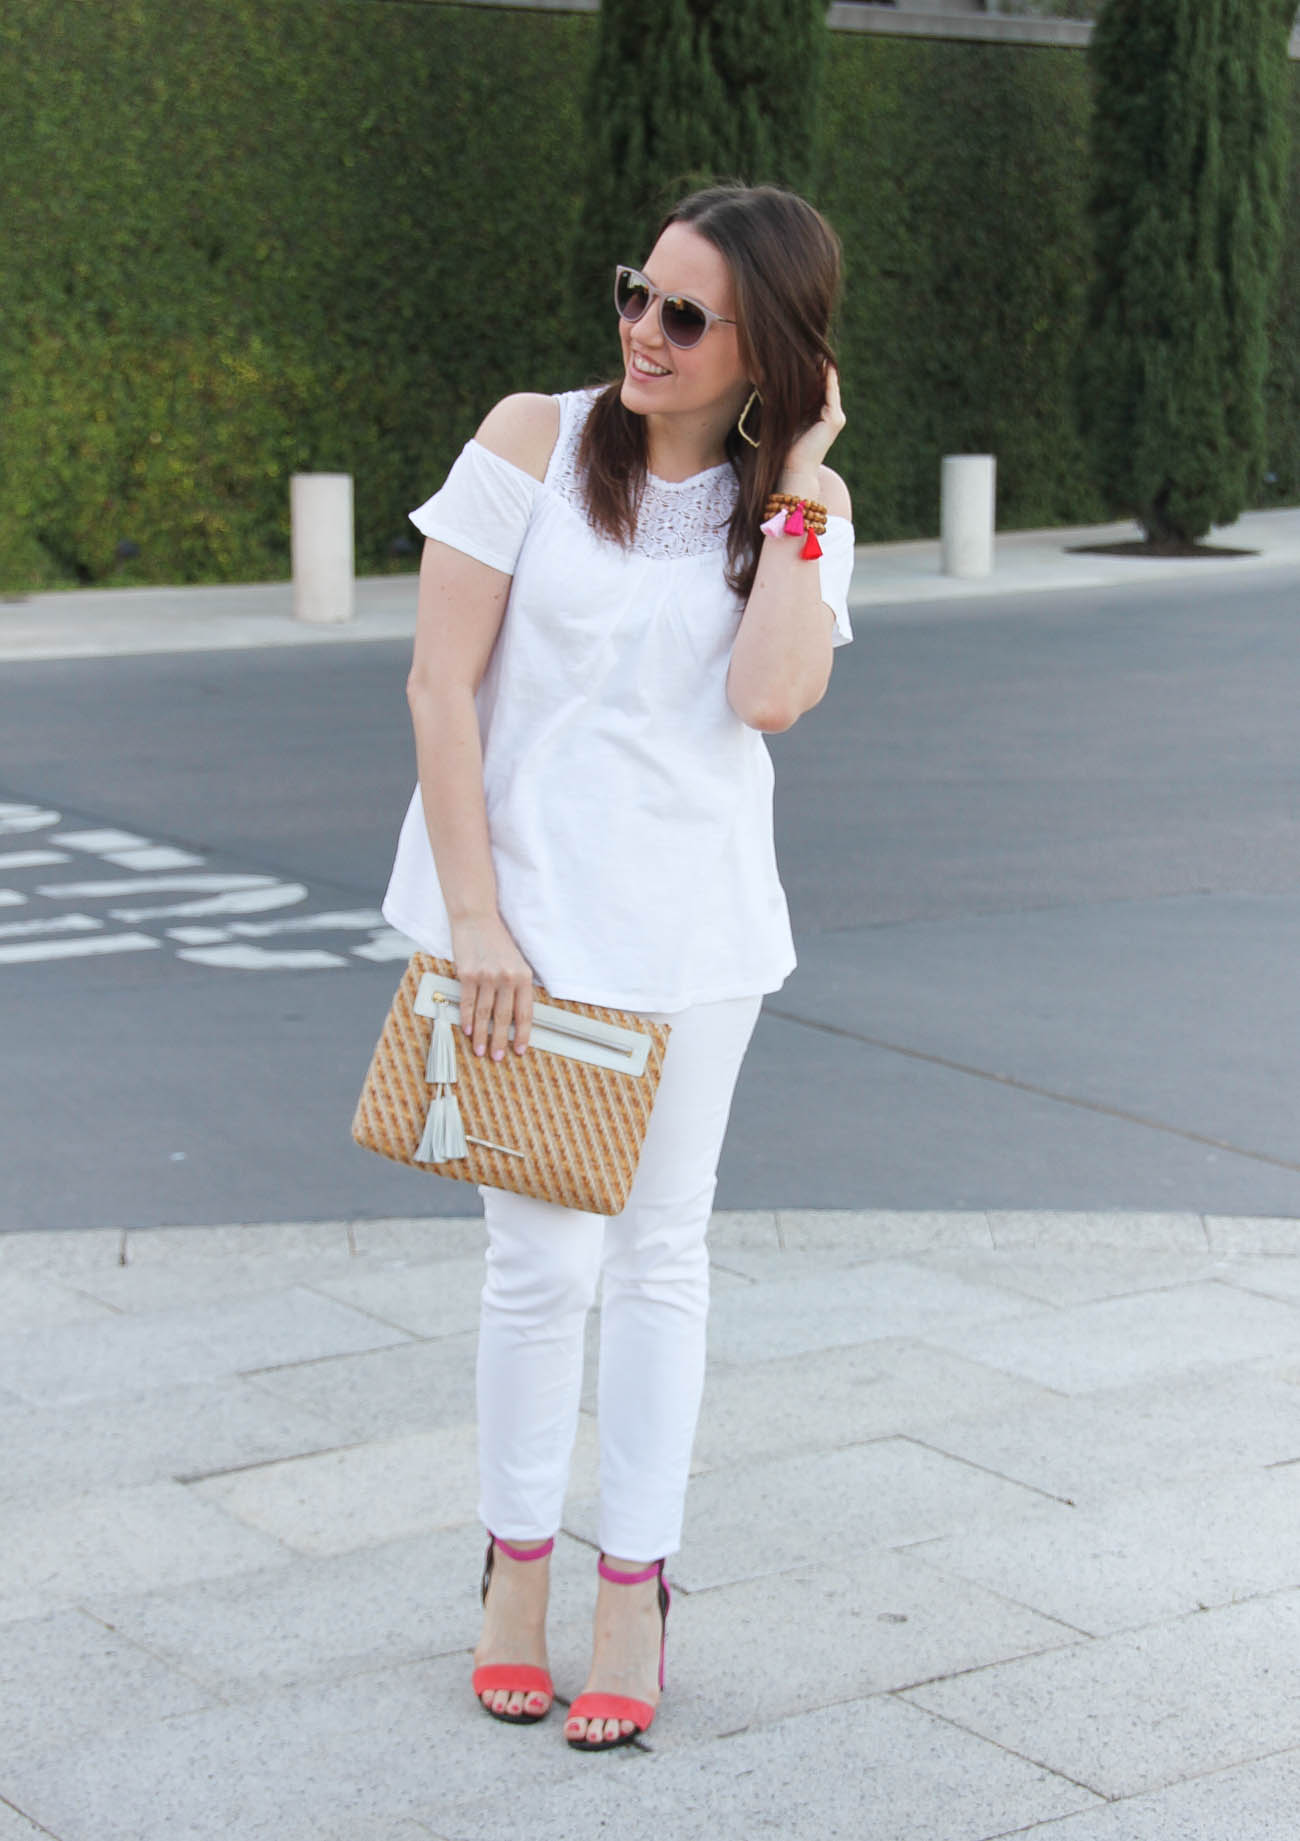 White on White Outfit + Block Heel Sandals | Lady in VioletLady in Violet